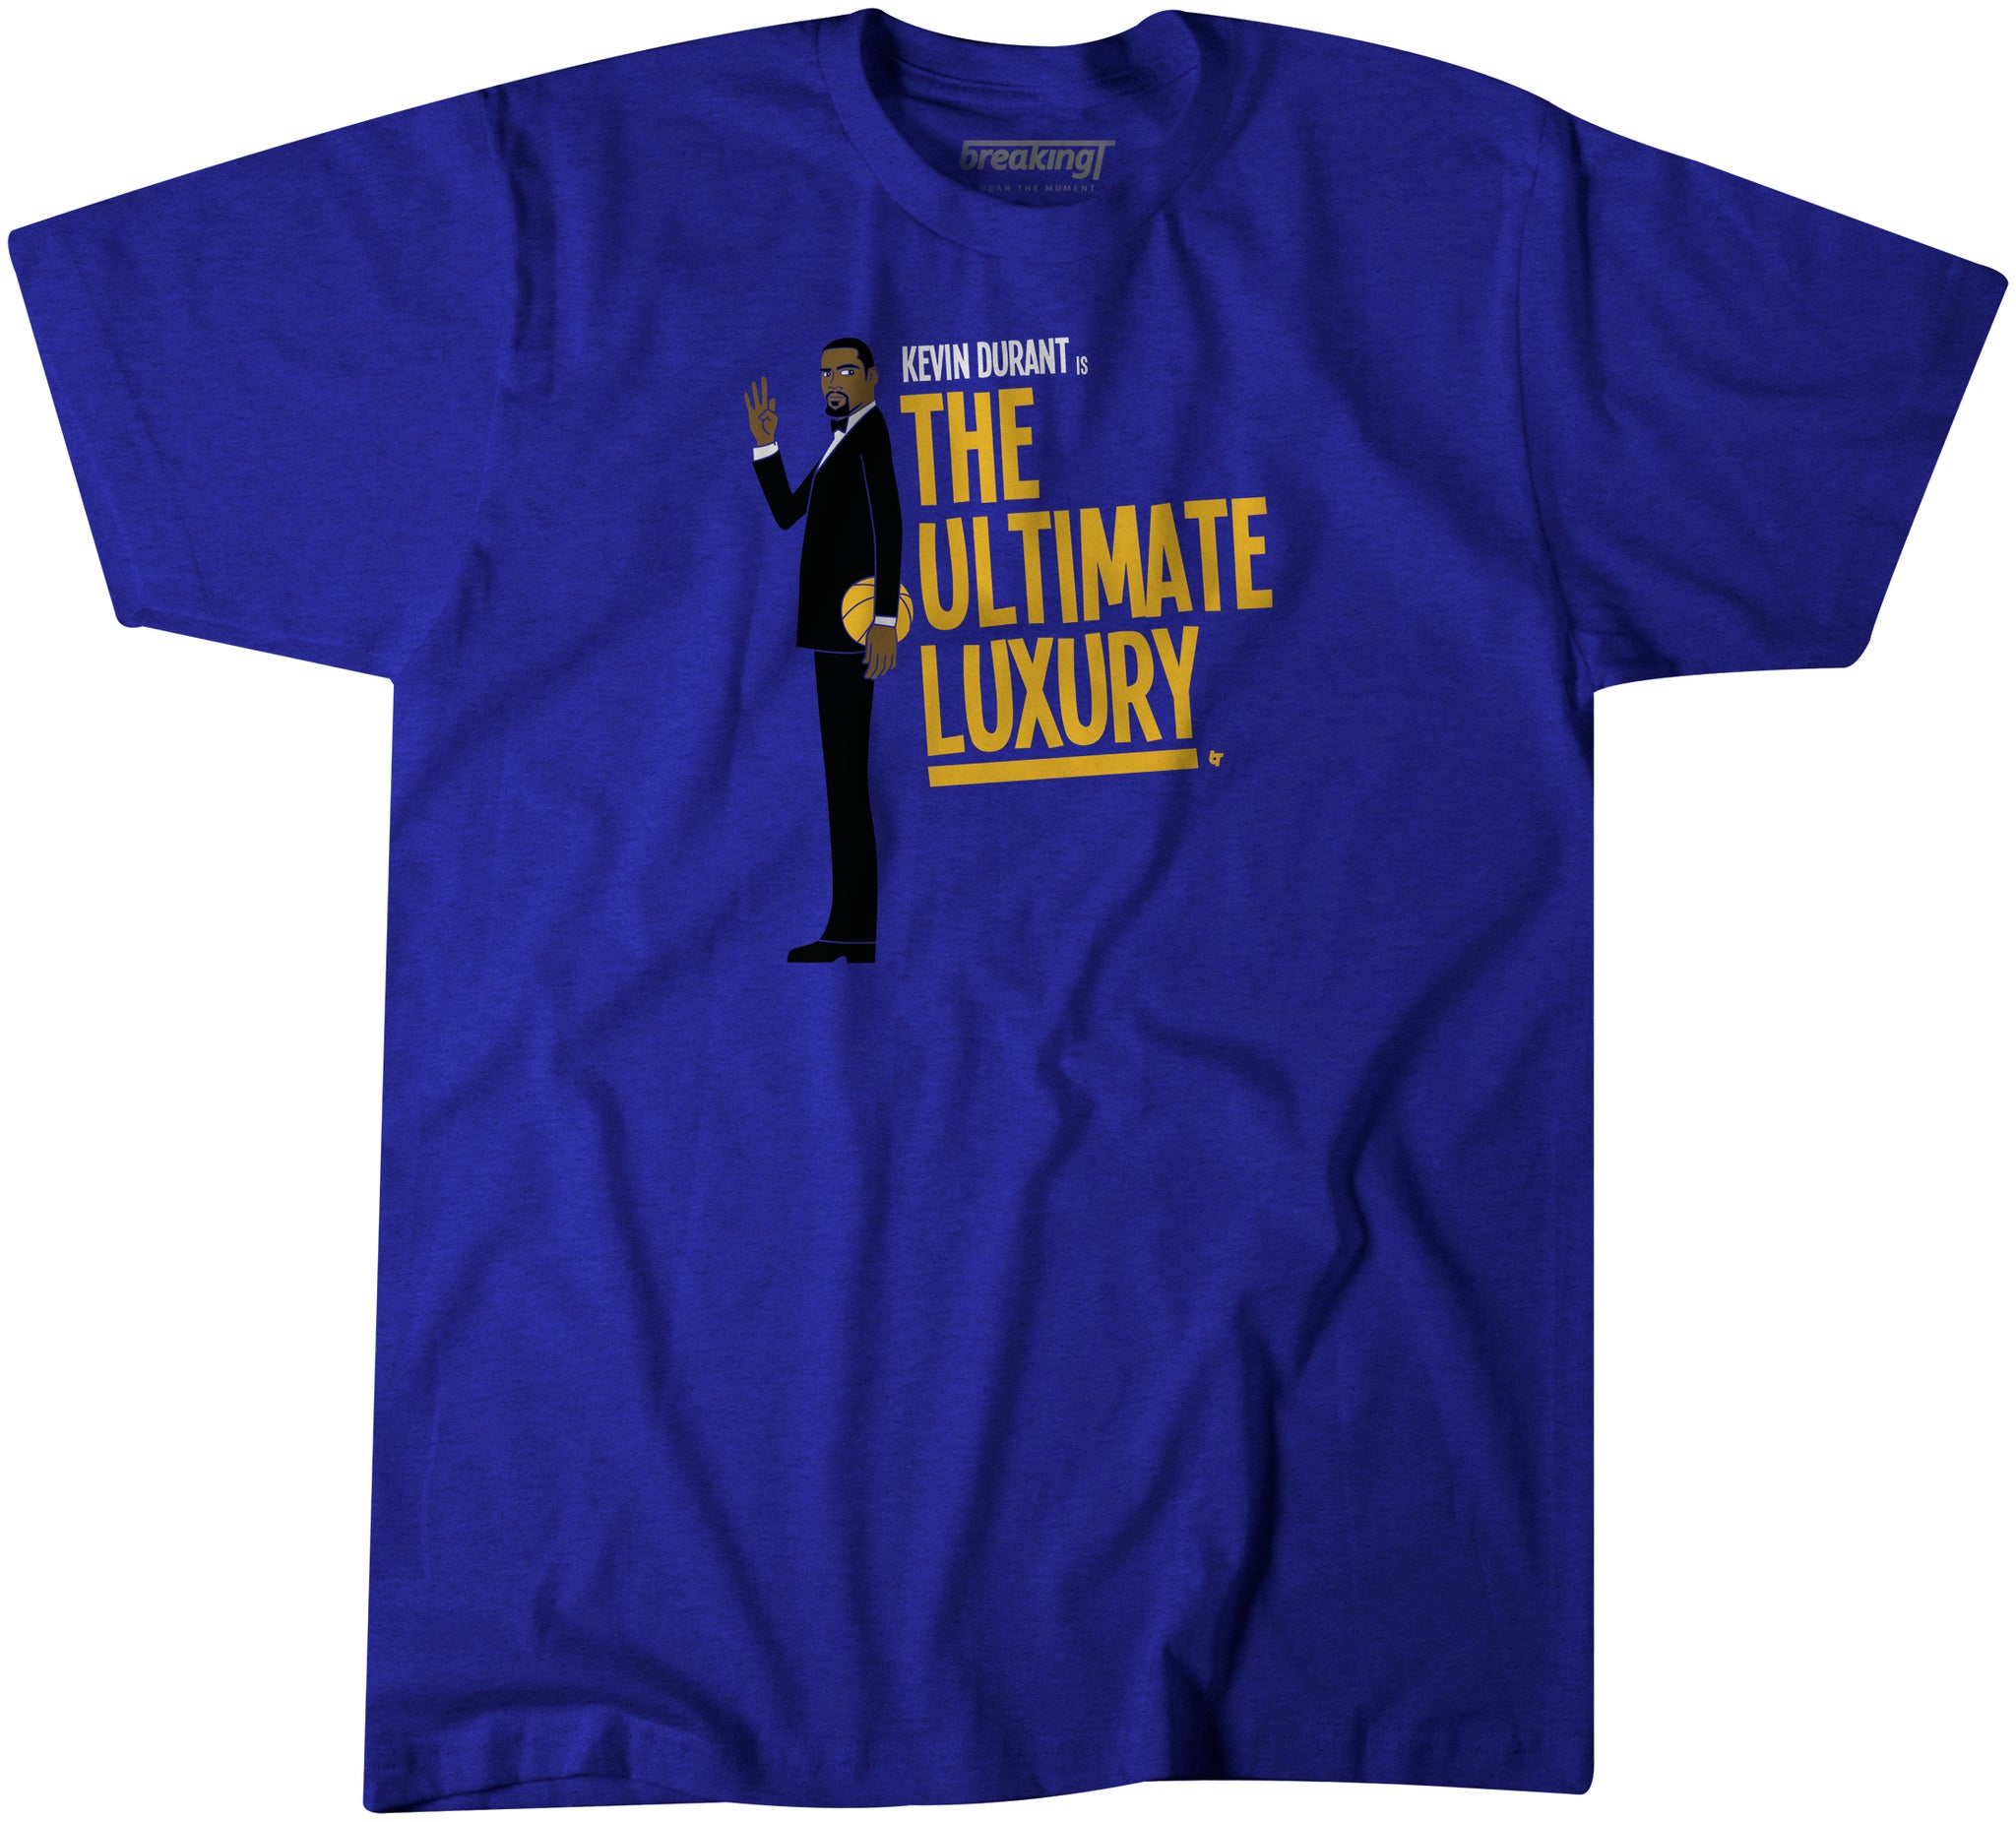 Kevin Durant Shirt, The Ultimate Luxury 